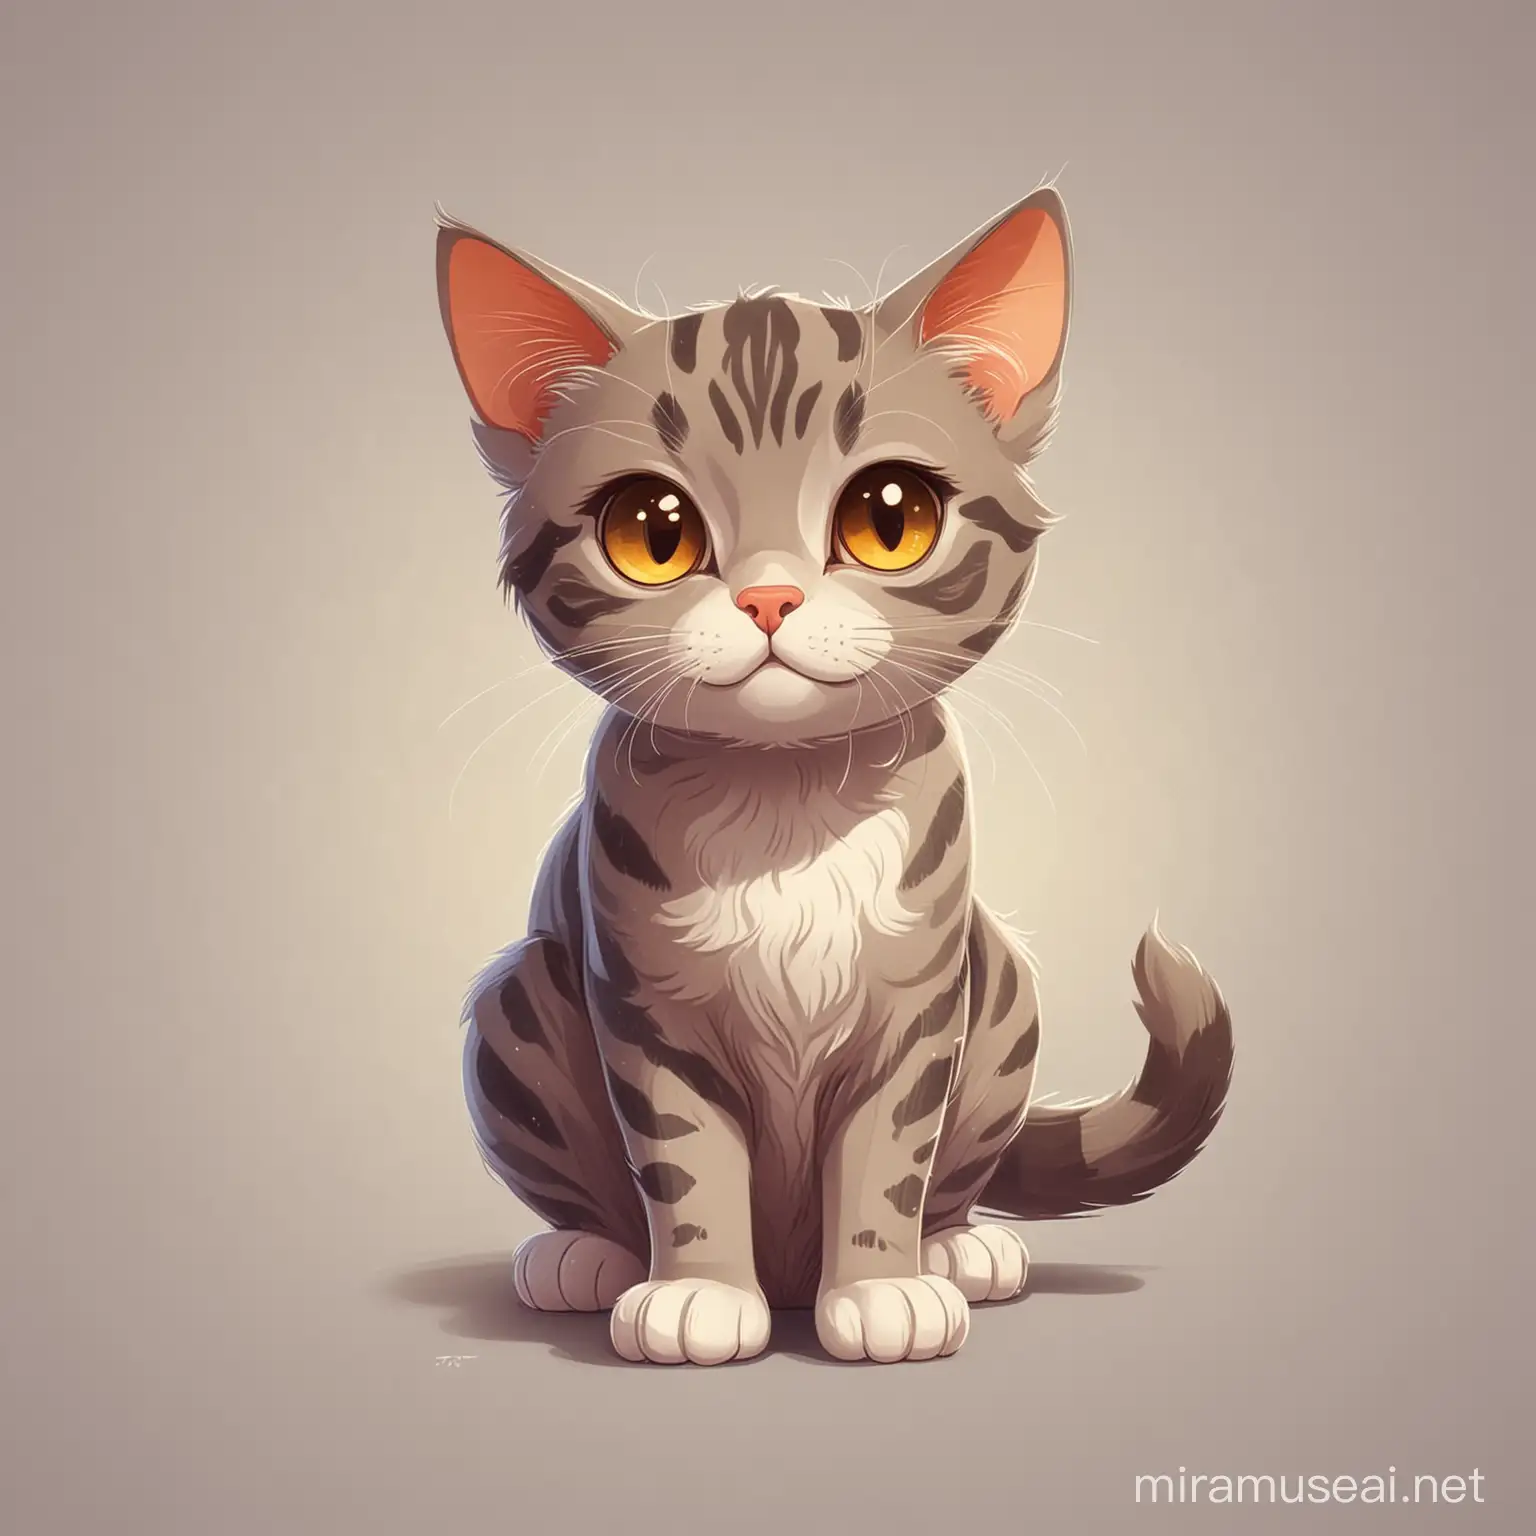 Adorable Cartoon Stray Cat Playful Feline with Endearing Features